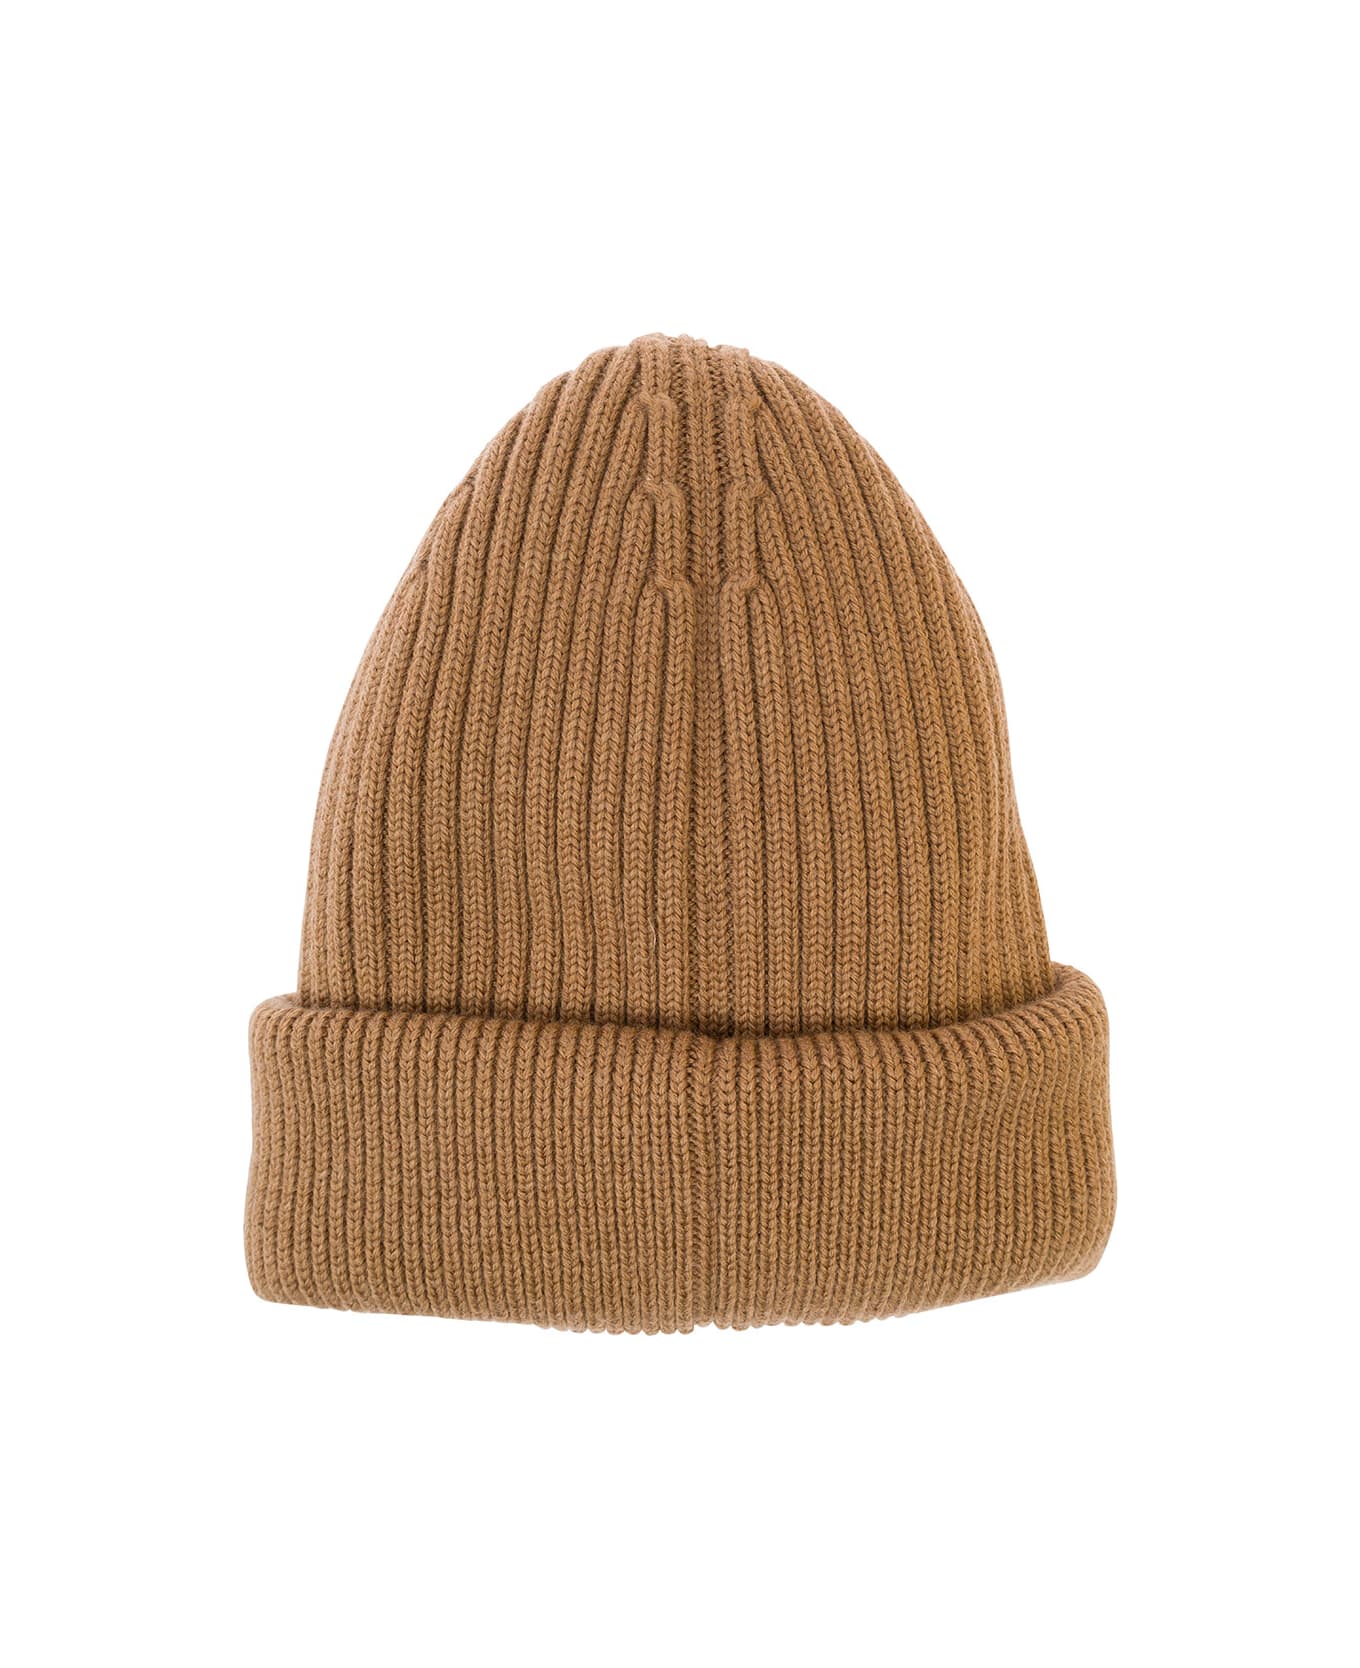 Moncler Grenoble Beige Beanie With Logo Embroidery In Wool Man - Beige 帽子